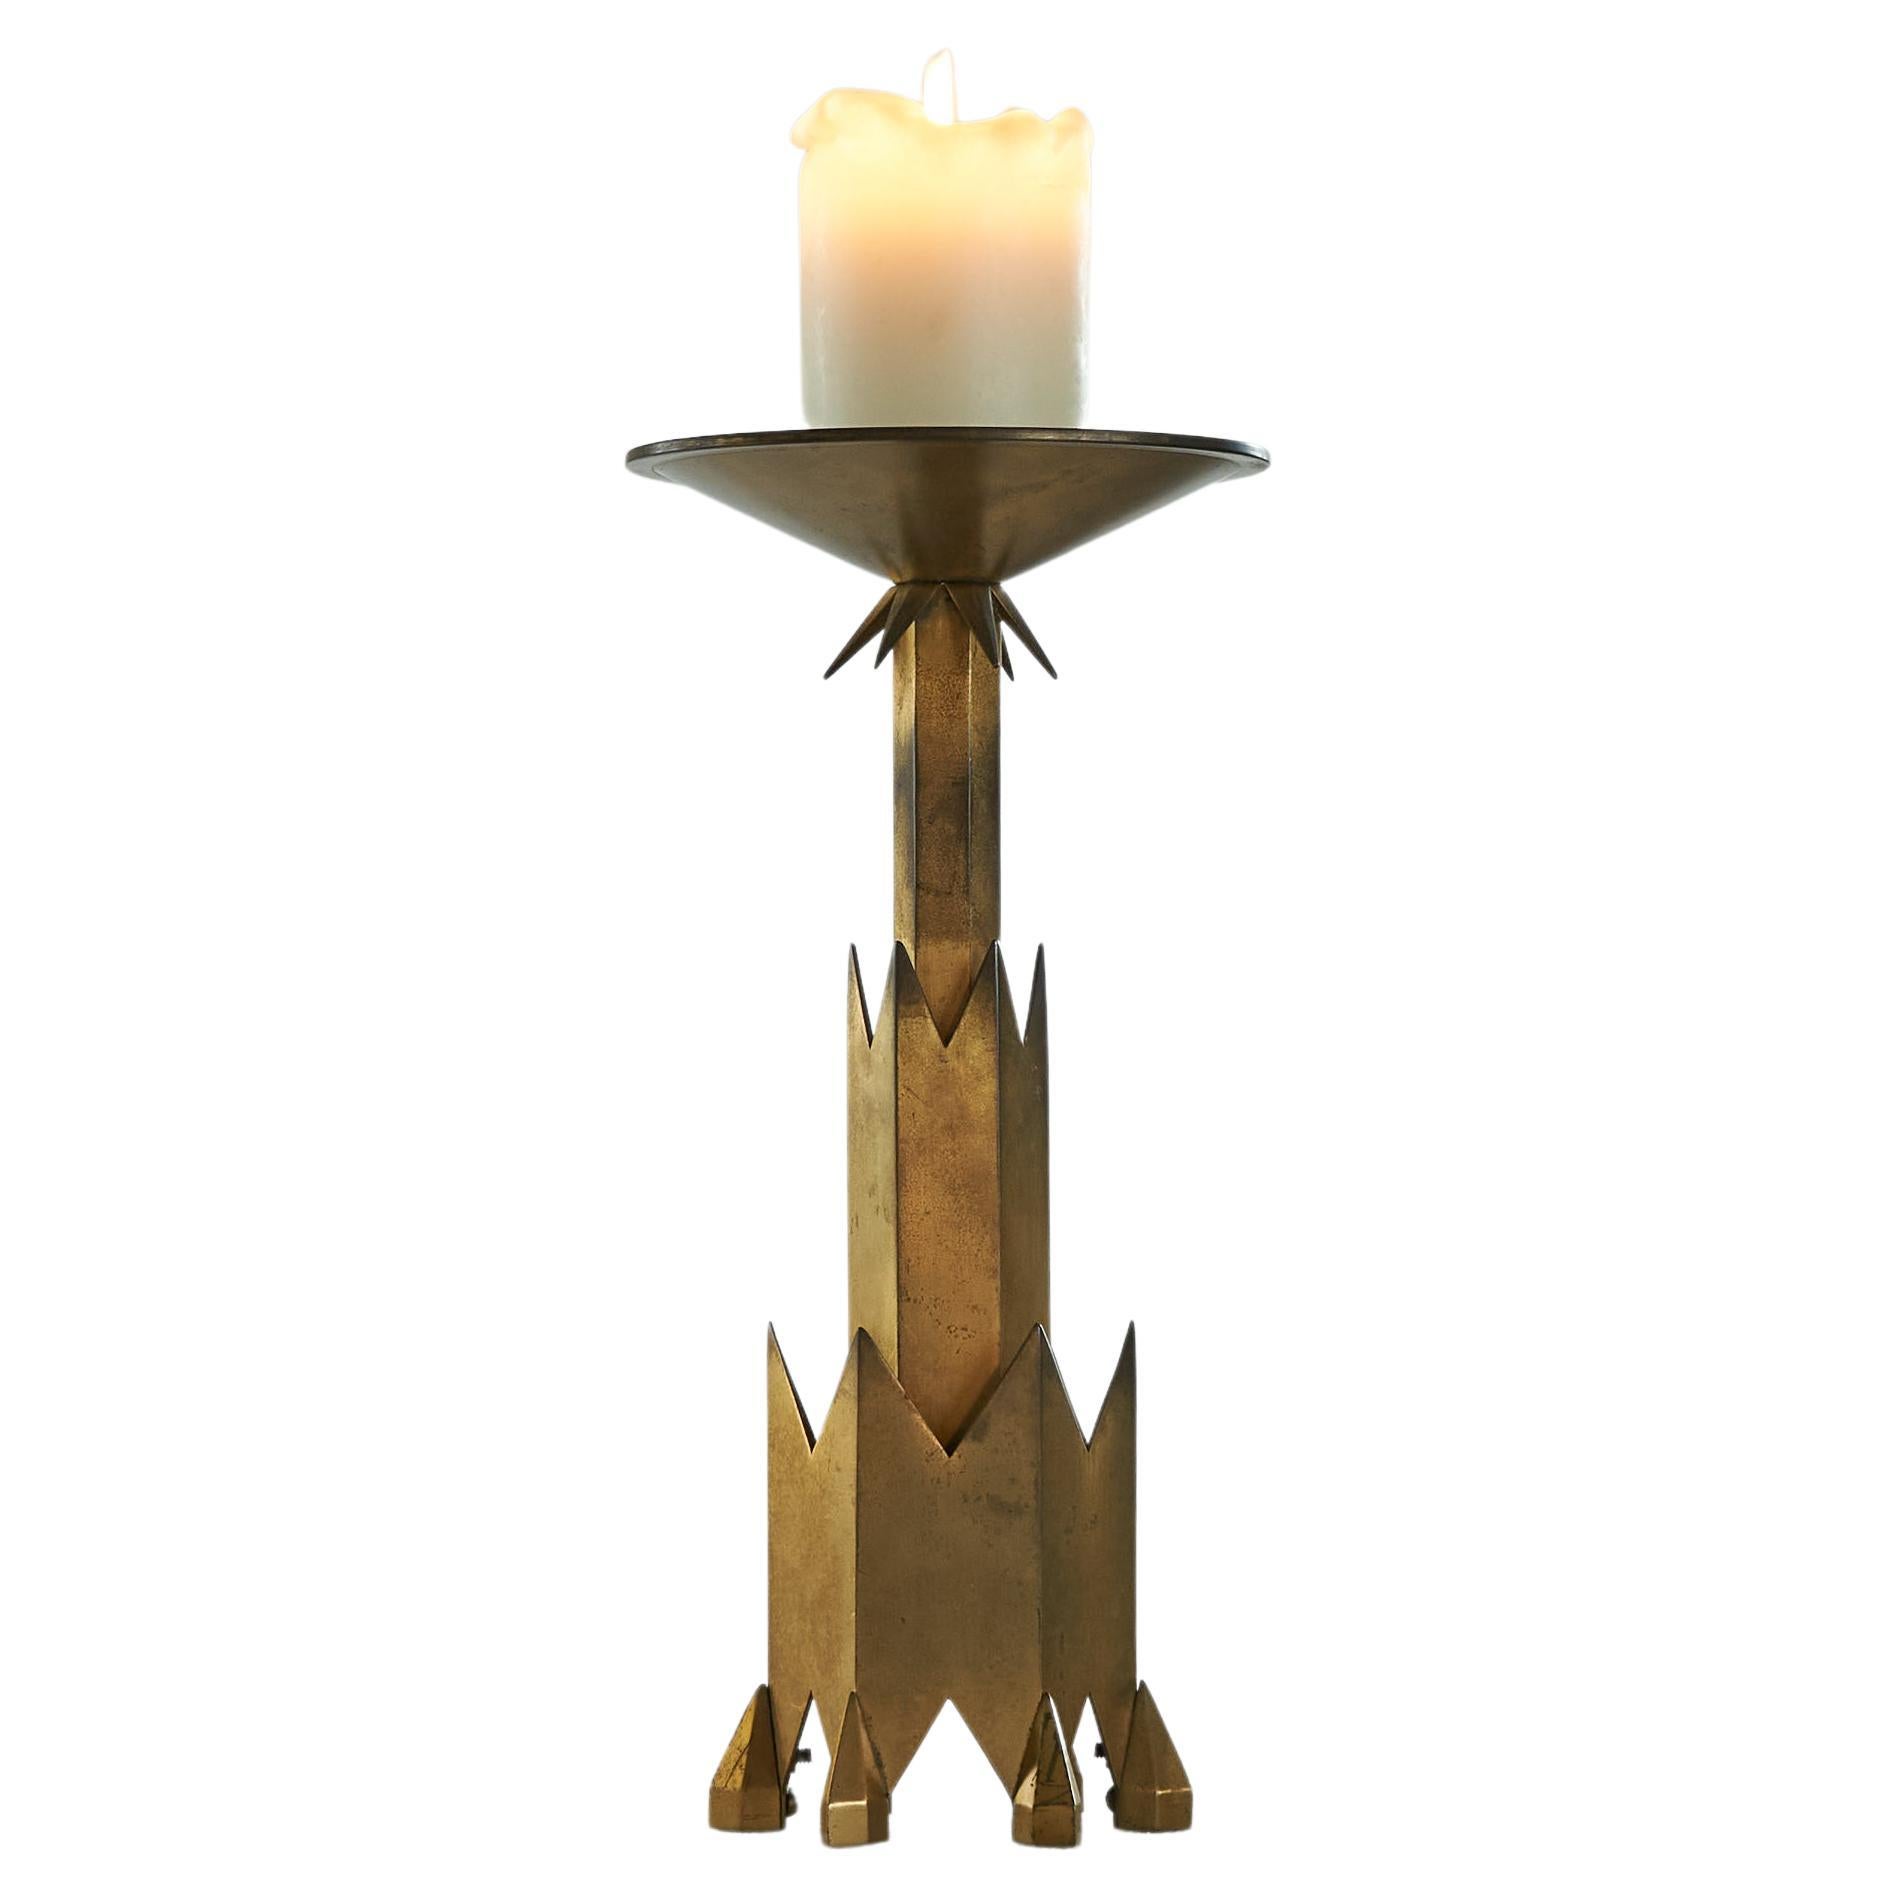 Remarkable Art Deco Candle Holder in Brass For Sale